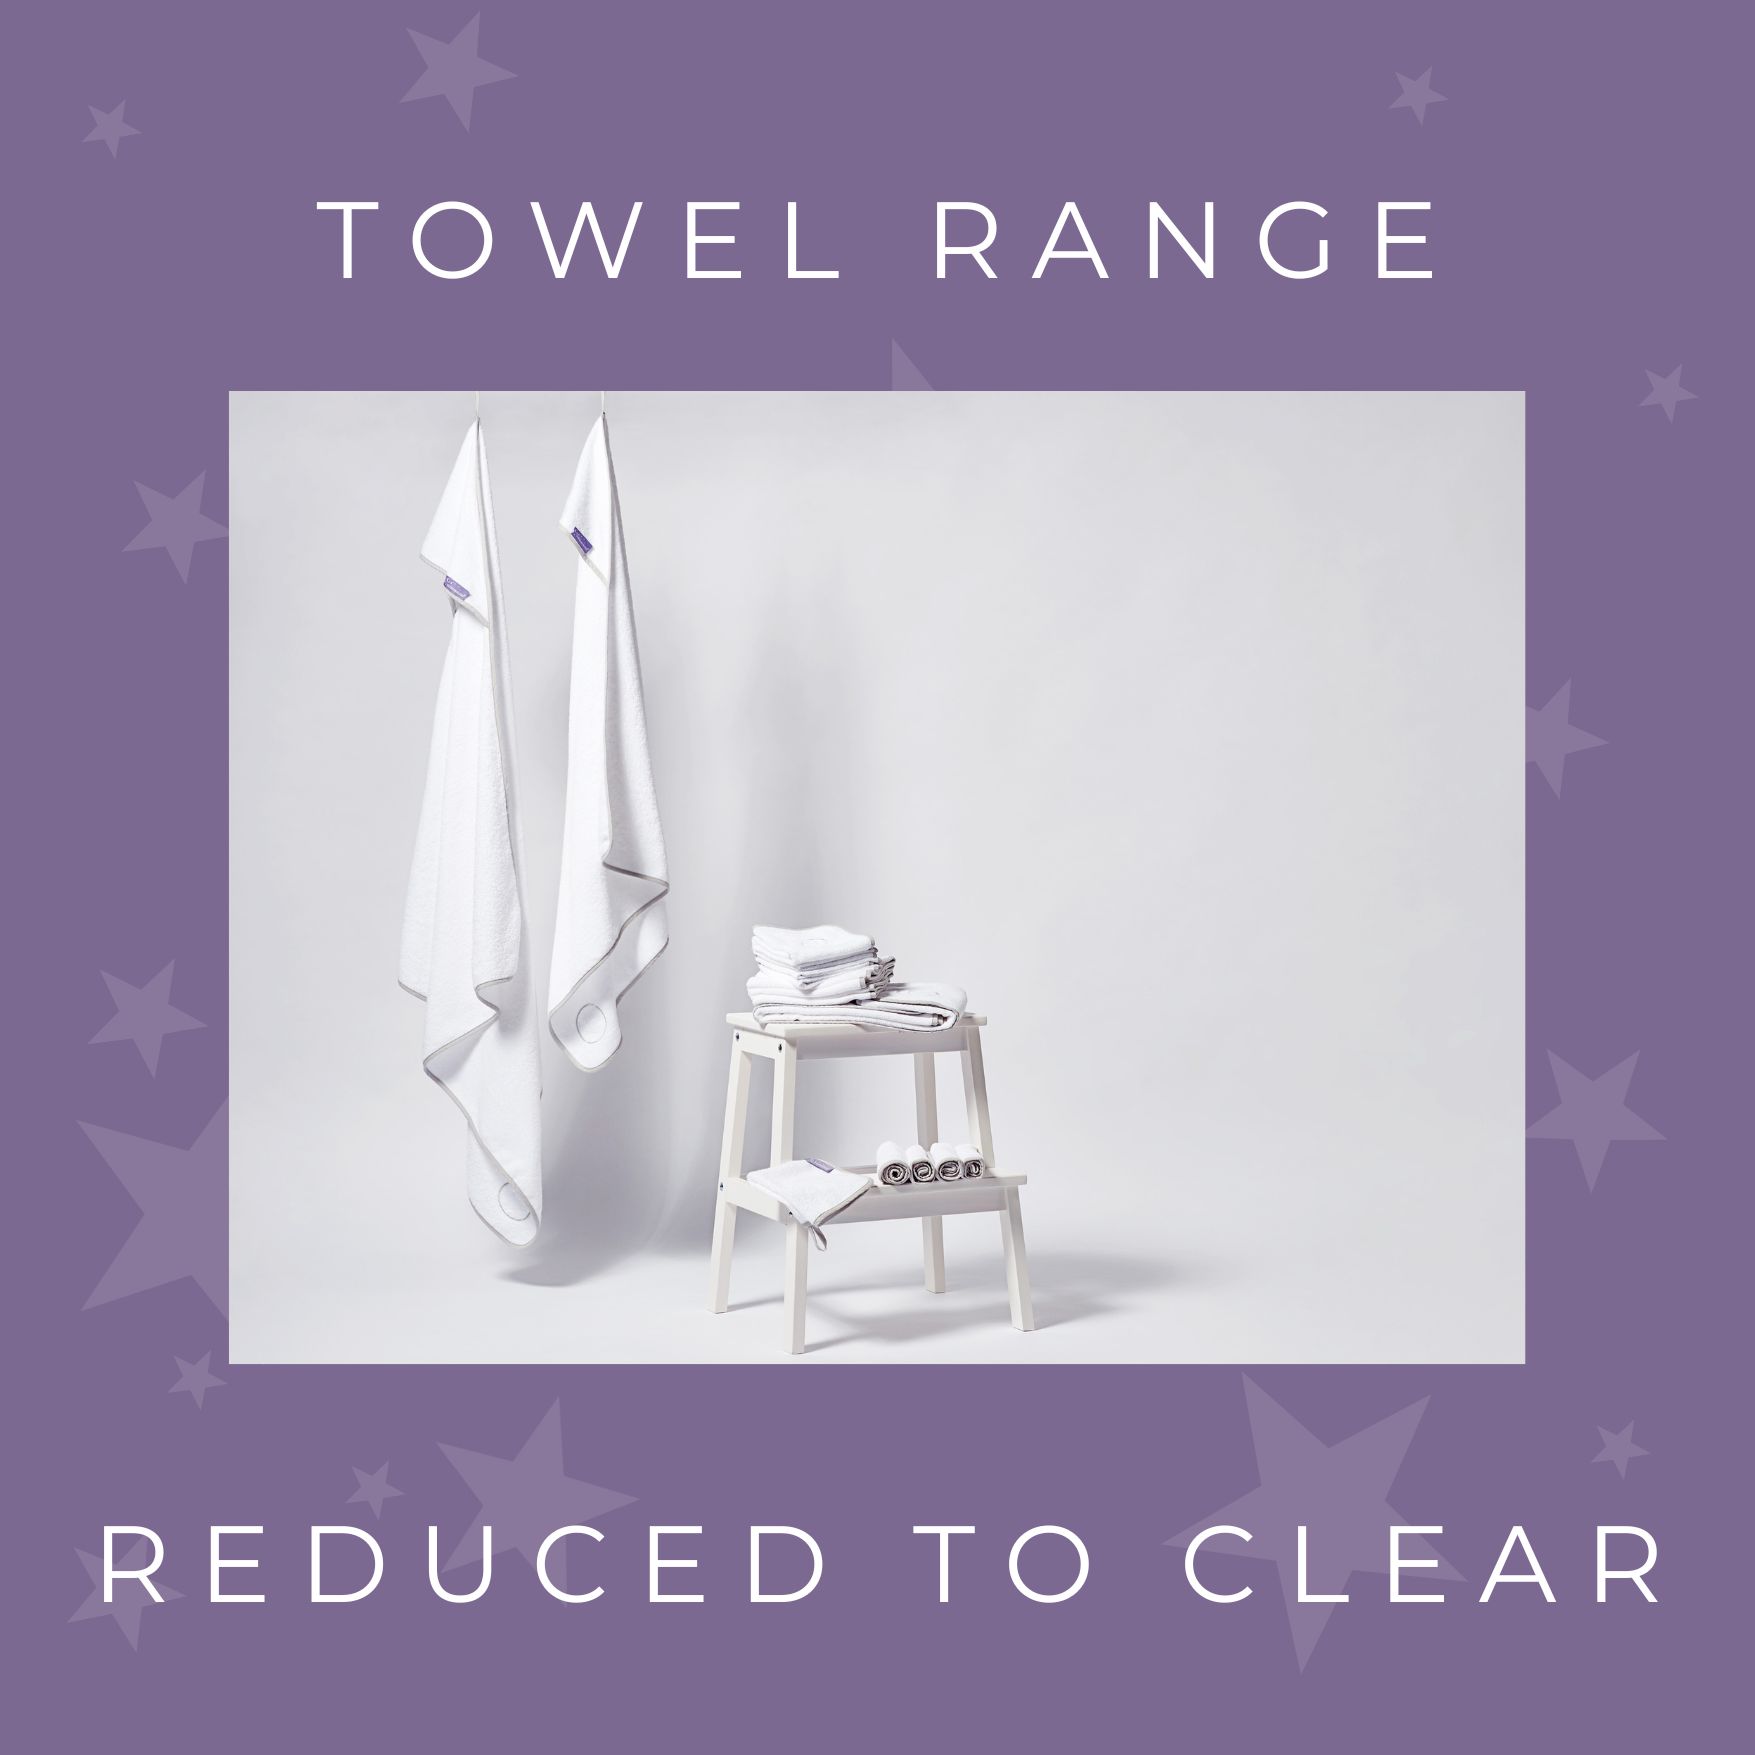 Towel Range | Reduced to Clear